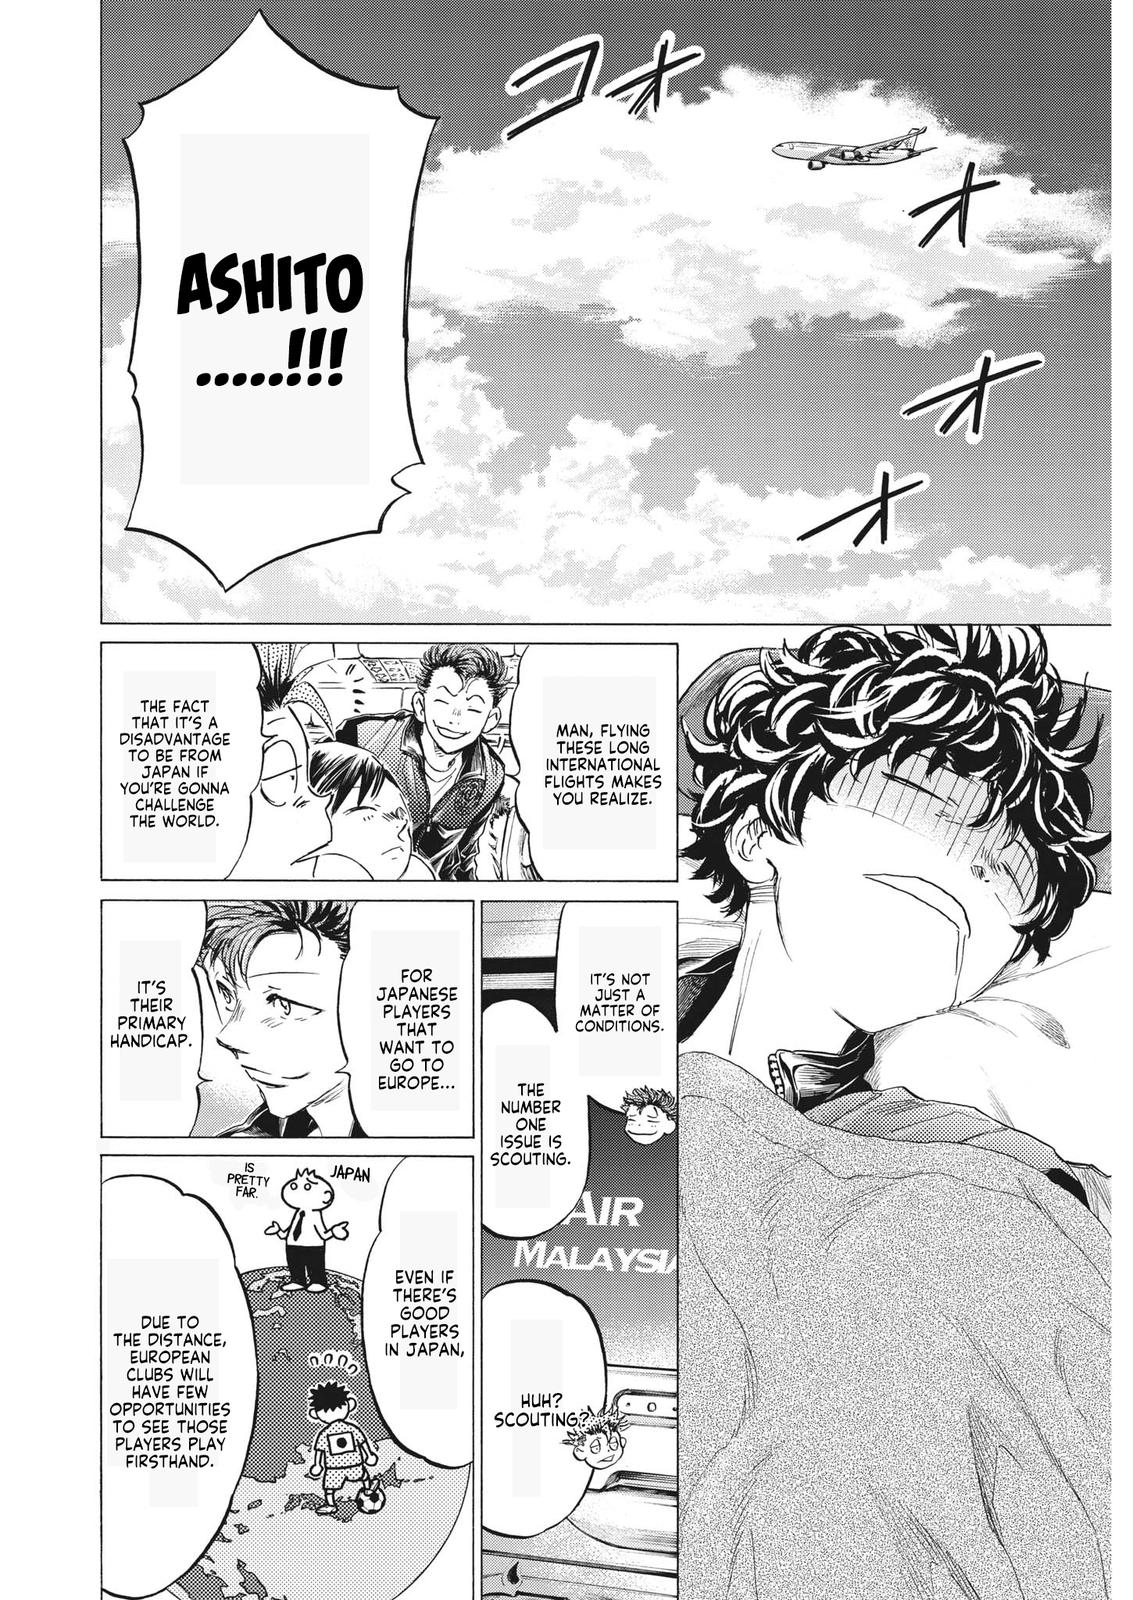 Ao Ashi, Chapter 338  TcbScans Org - Free Manga Online in High